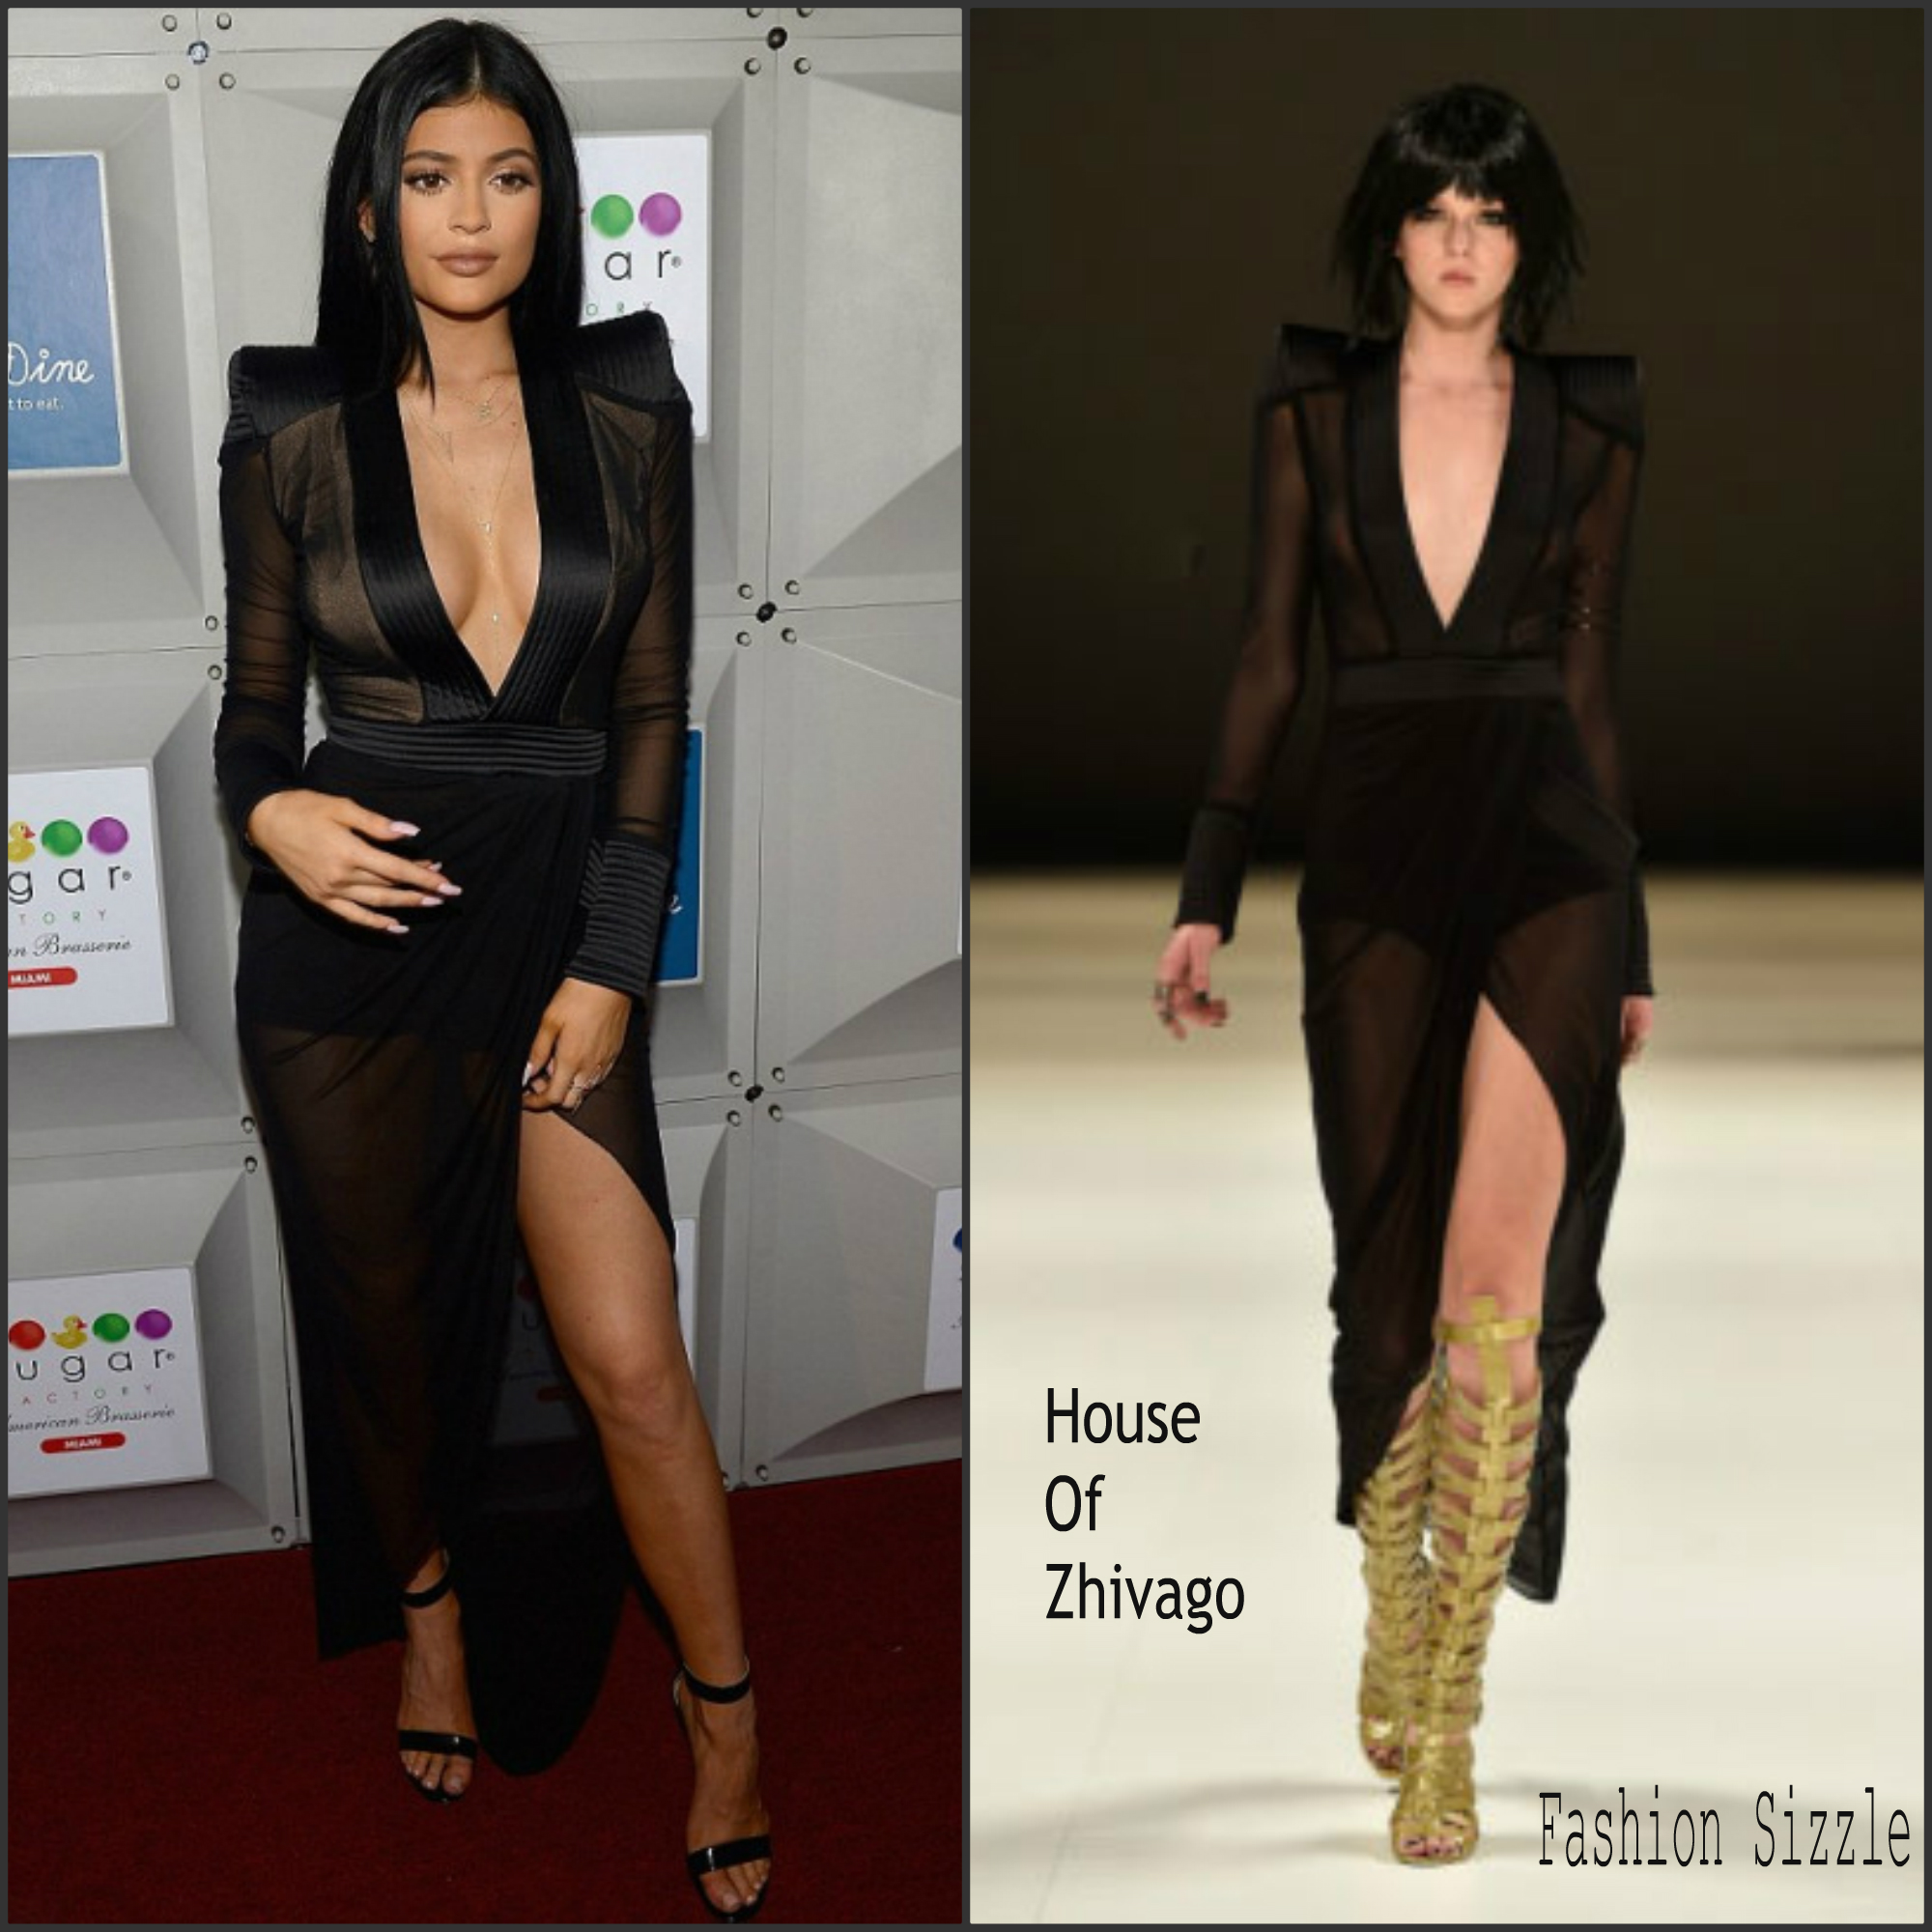 kylie-jenner-in-zhivago-sugar-factory-miami-opening-house